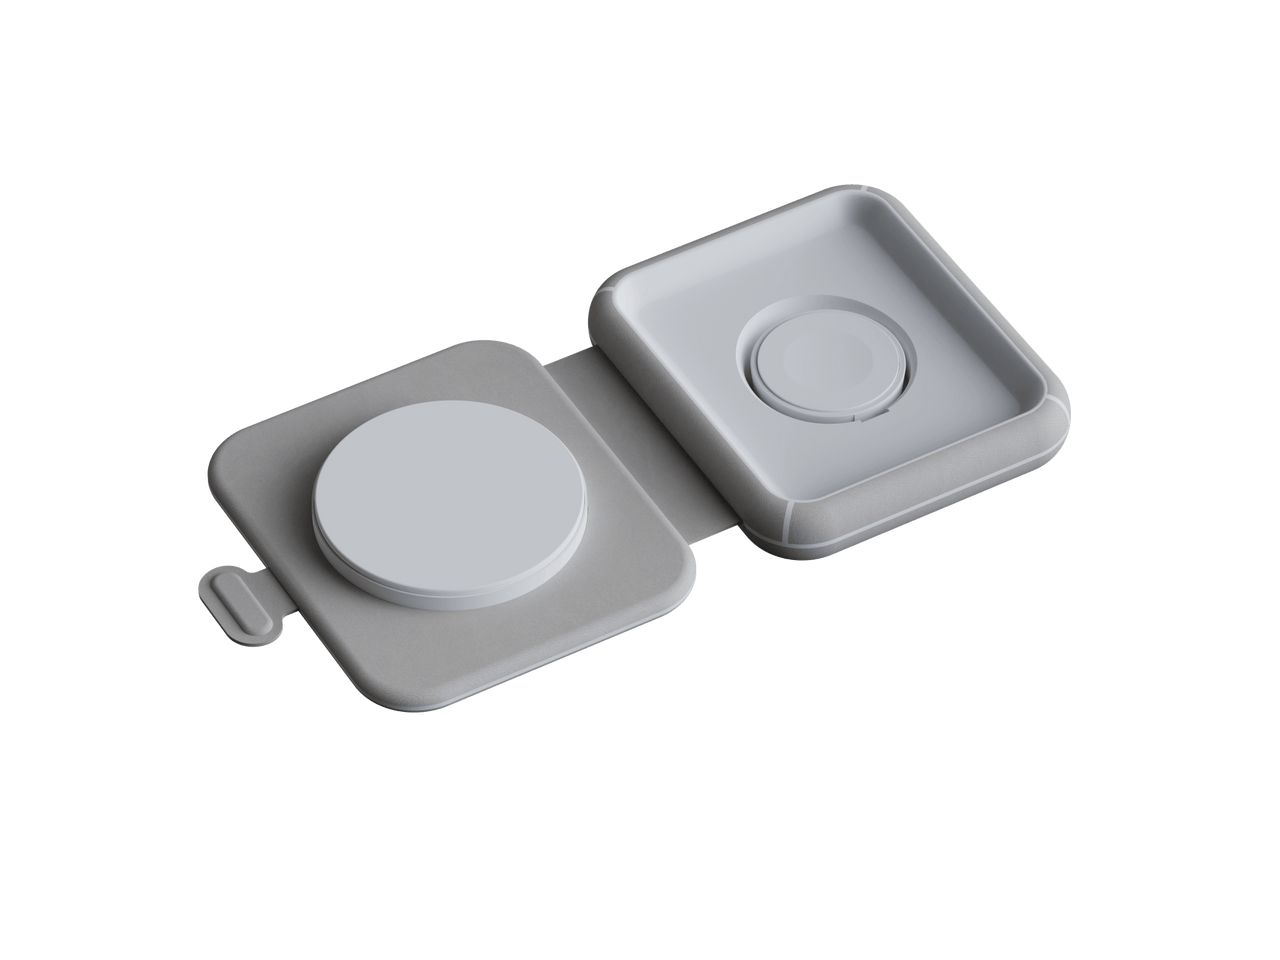 Foldable Wireless Travel Charger 2in1 - Xtorm EU